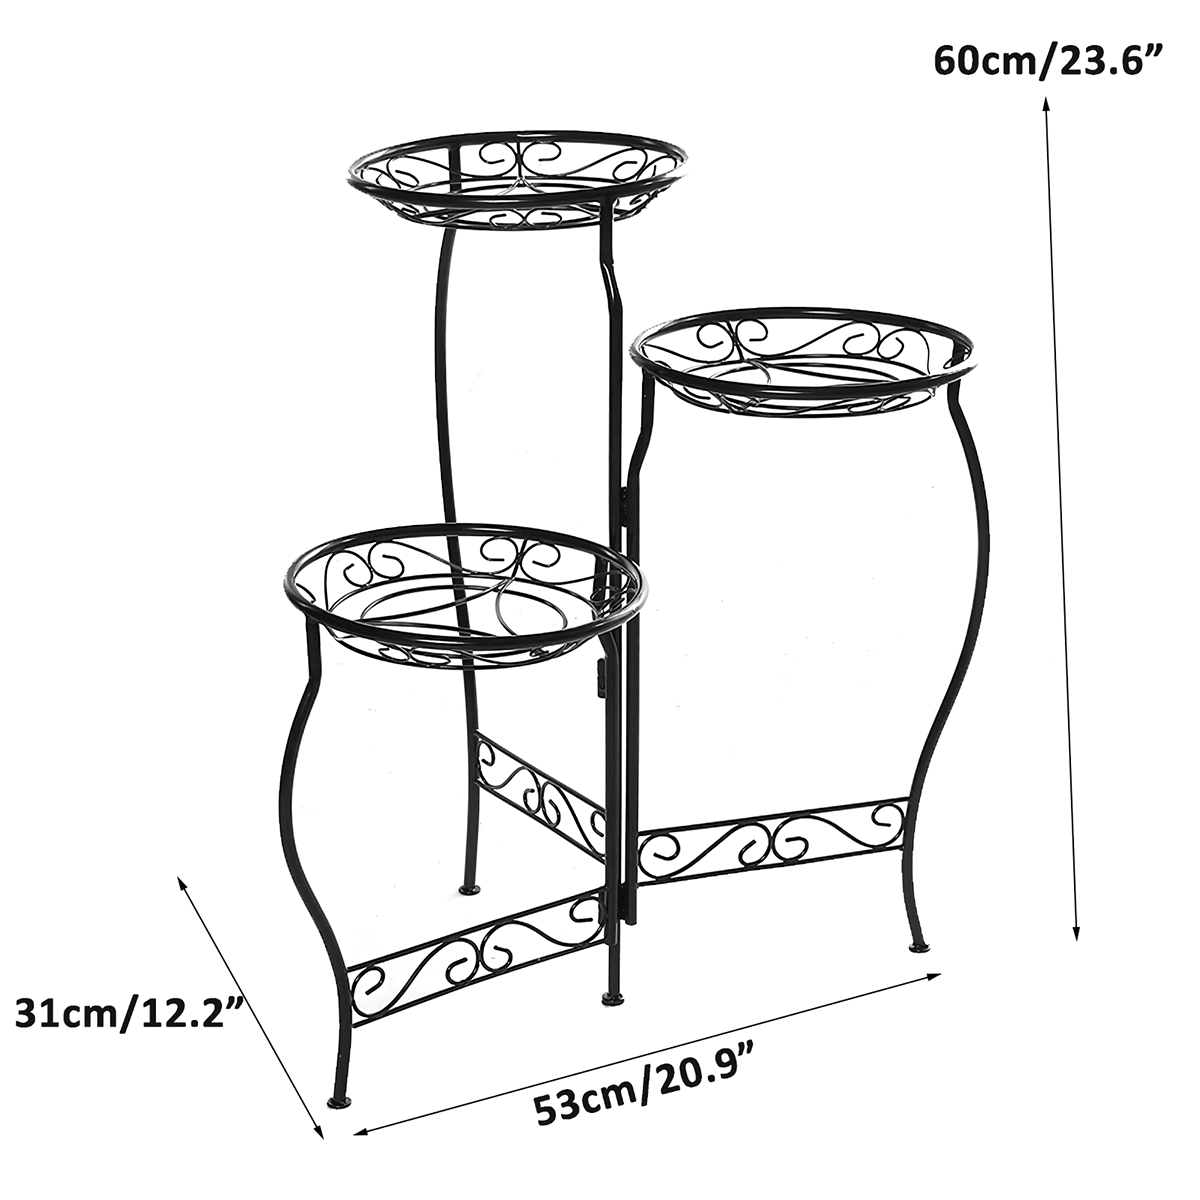 Metal-Flower-Pot-Stand-3-Tiers-Rounded-Plant--Holder-Indoor-Outdoor-Flower-Plant-Stand-Displaying-Ra-1797075-2